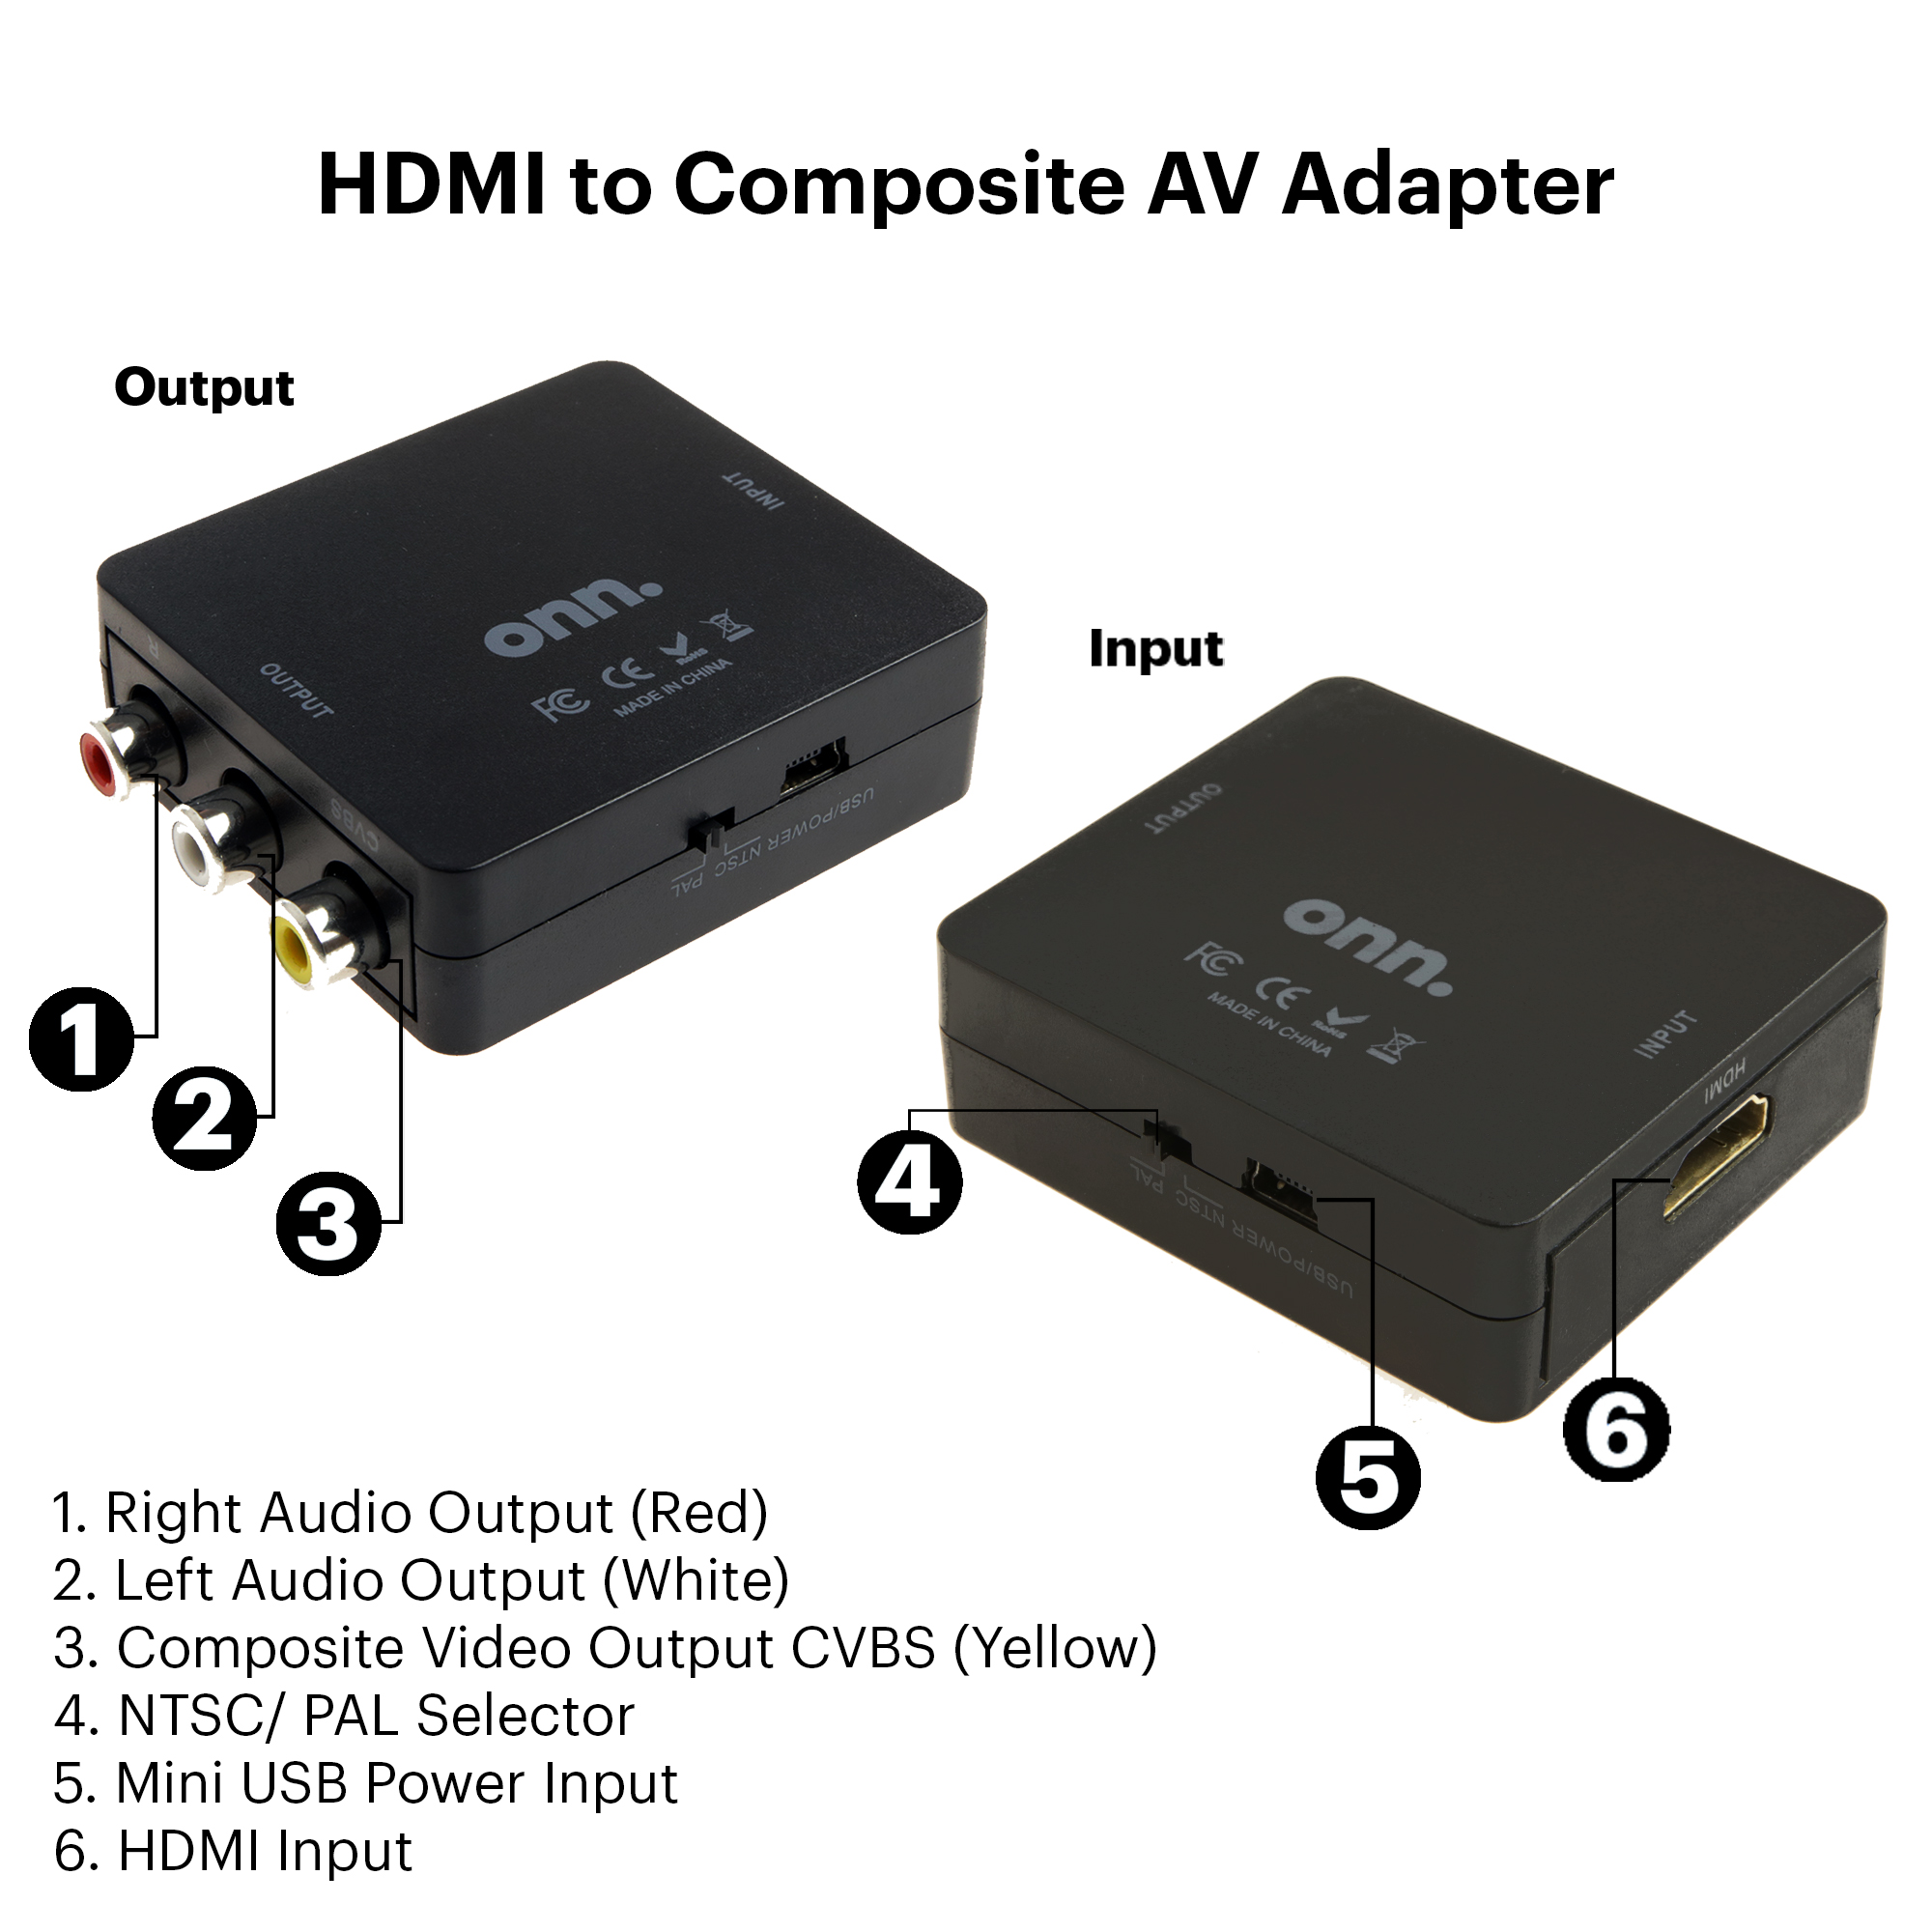 onn. HDMI to Composite AV Adapter, 2.6' Mini-USB Cable, 4.1" USB Wall Adapter, Black, 100008628 - image 3 of 7